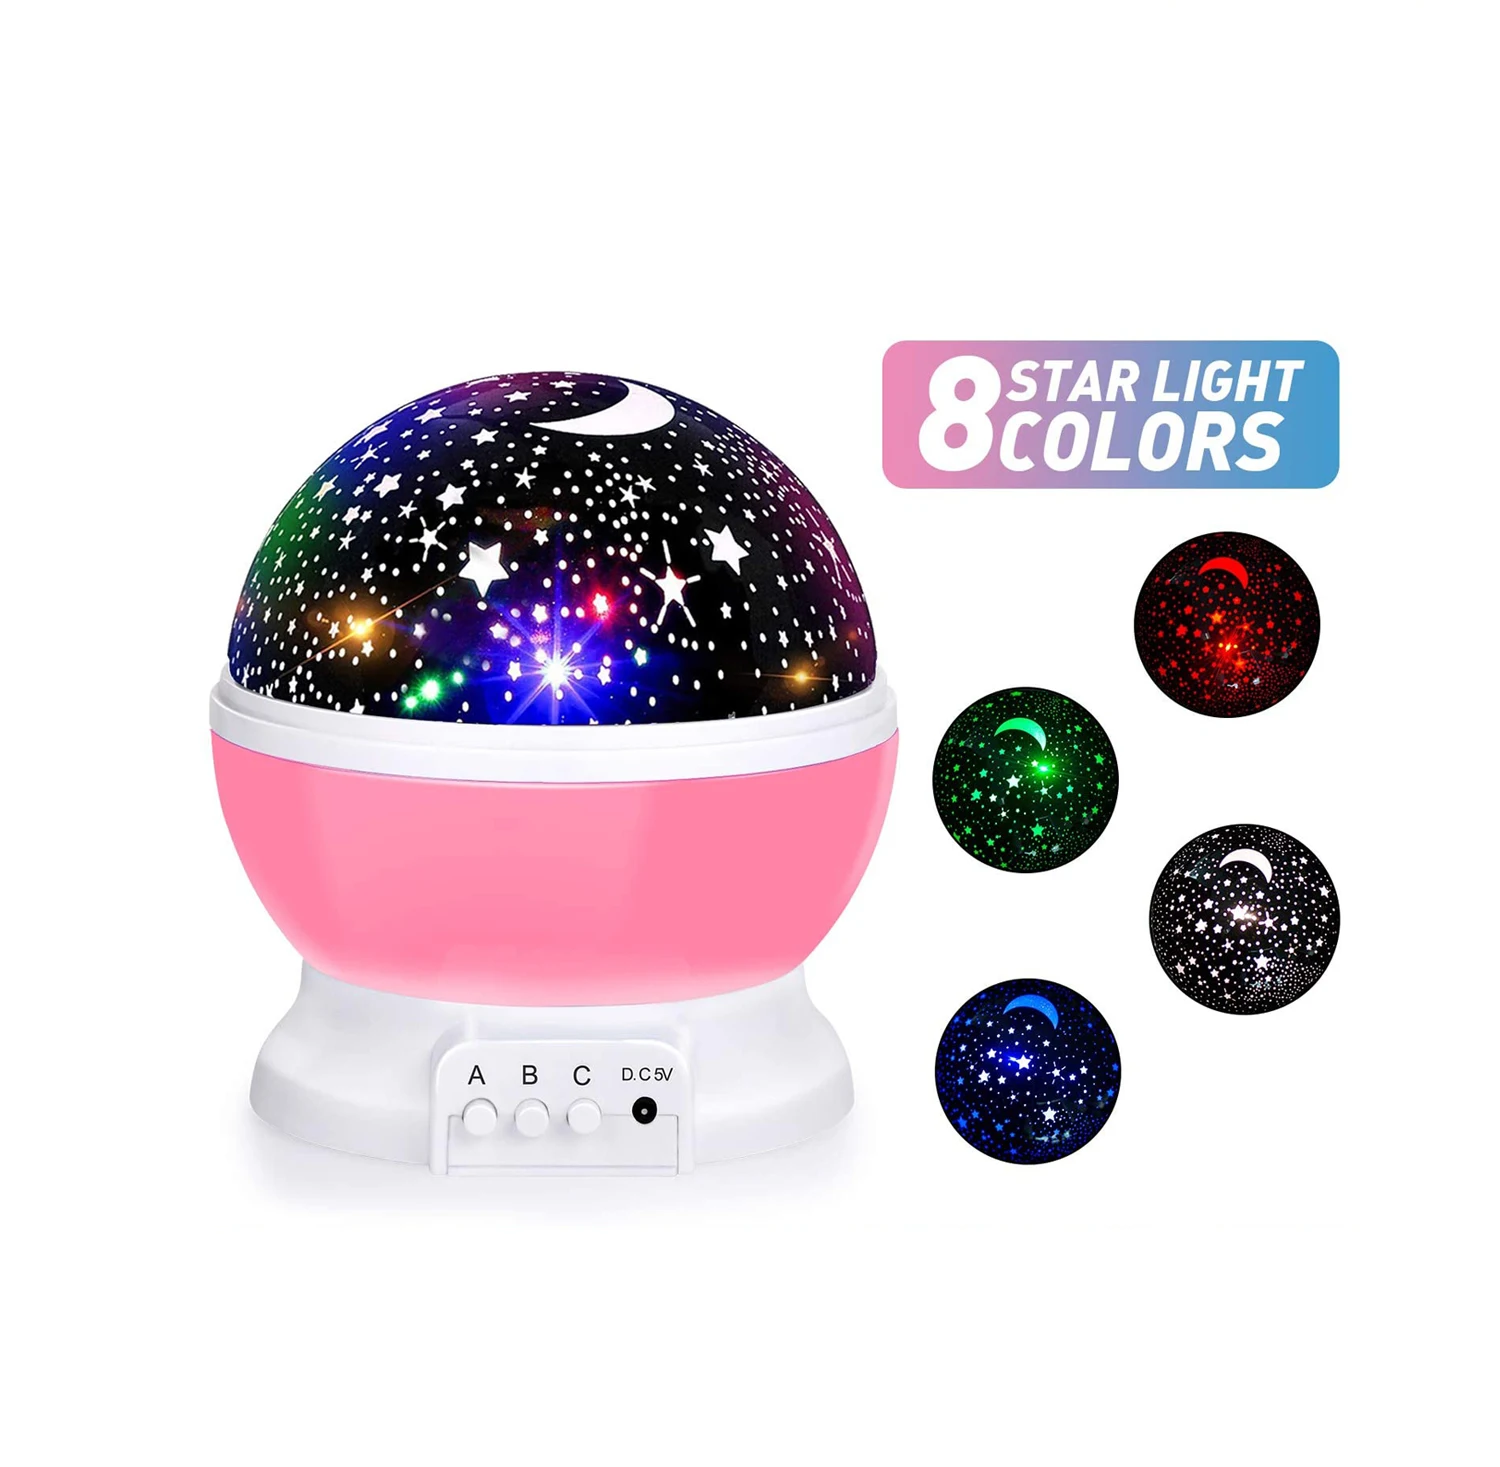 4 LED Bulbs 8 Color Changing Romantic Lighting Lamp Moon Star Projector 360 Degree Rotation Baby Night Lights for Bedroom